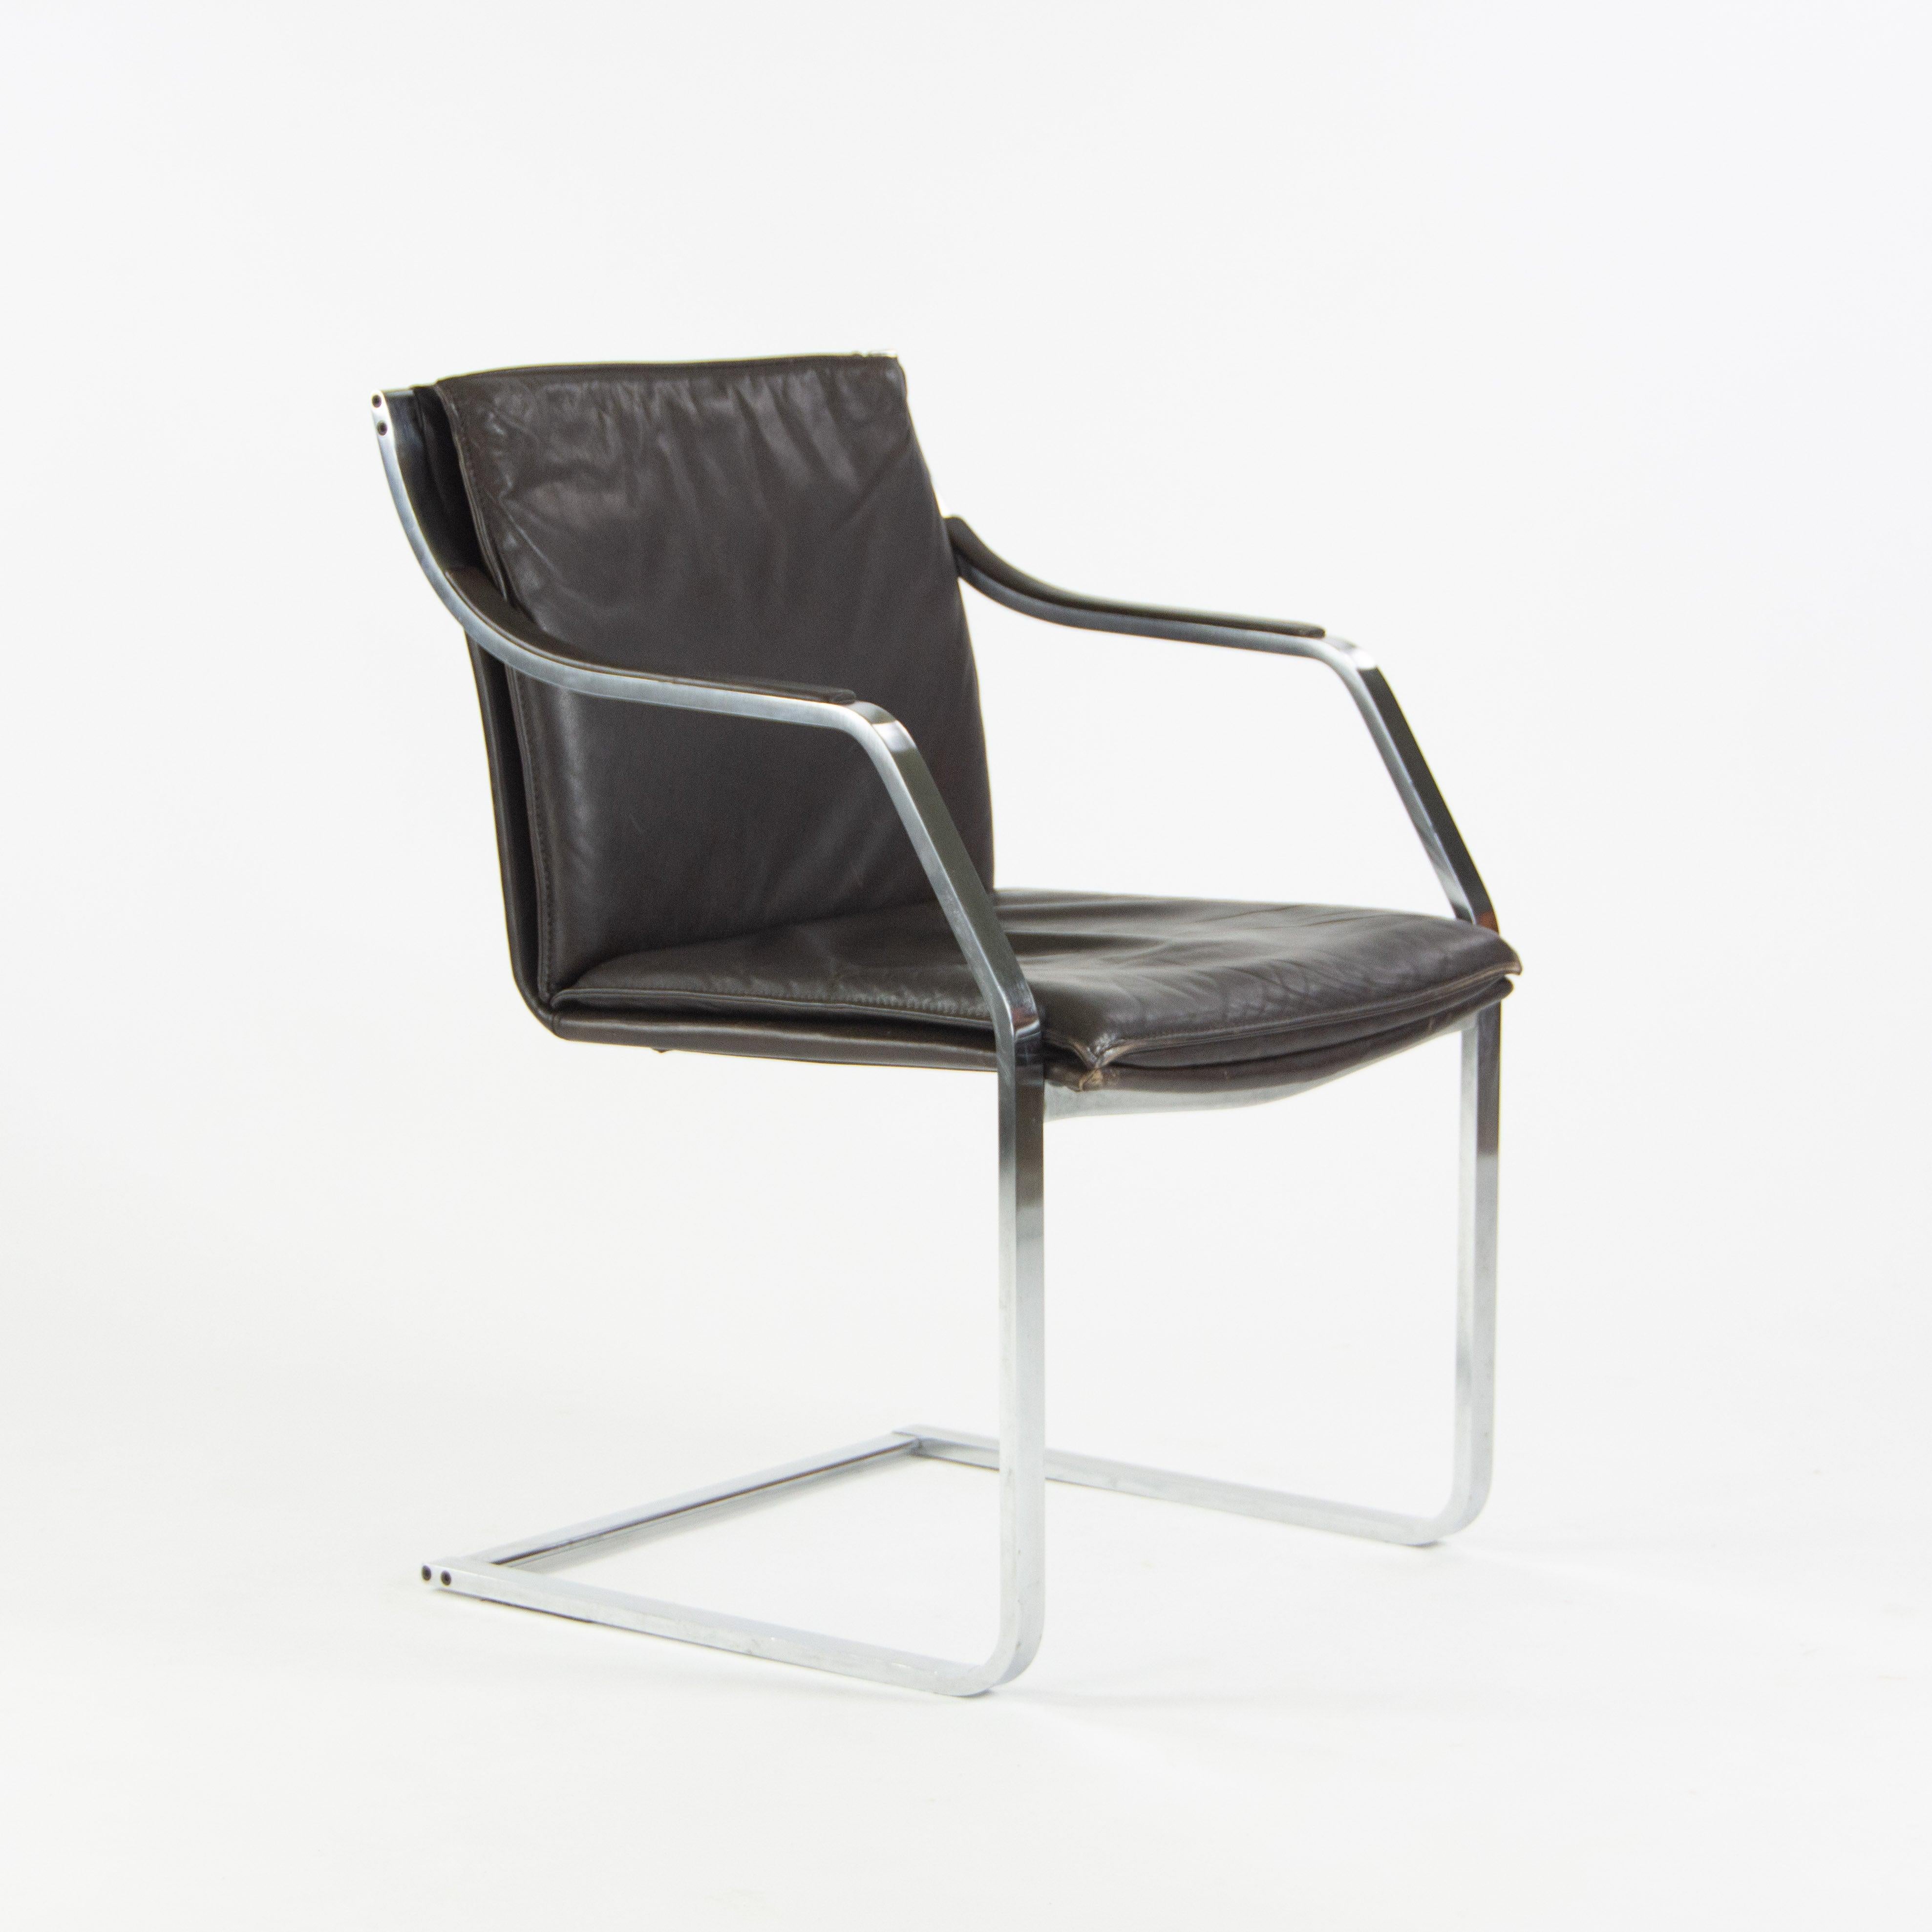 Modern Rudolf B. Glatzel Vintage Walter Knoll Art Collection Leather & Stainless Chair For Sale